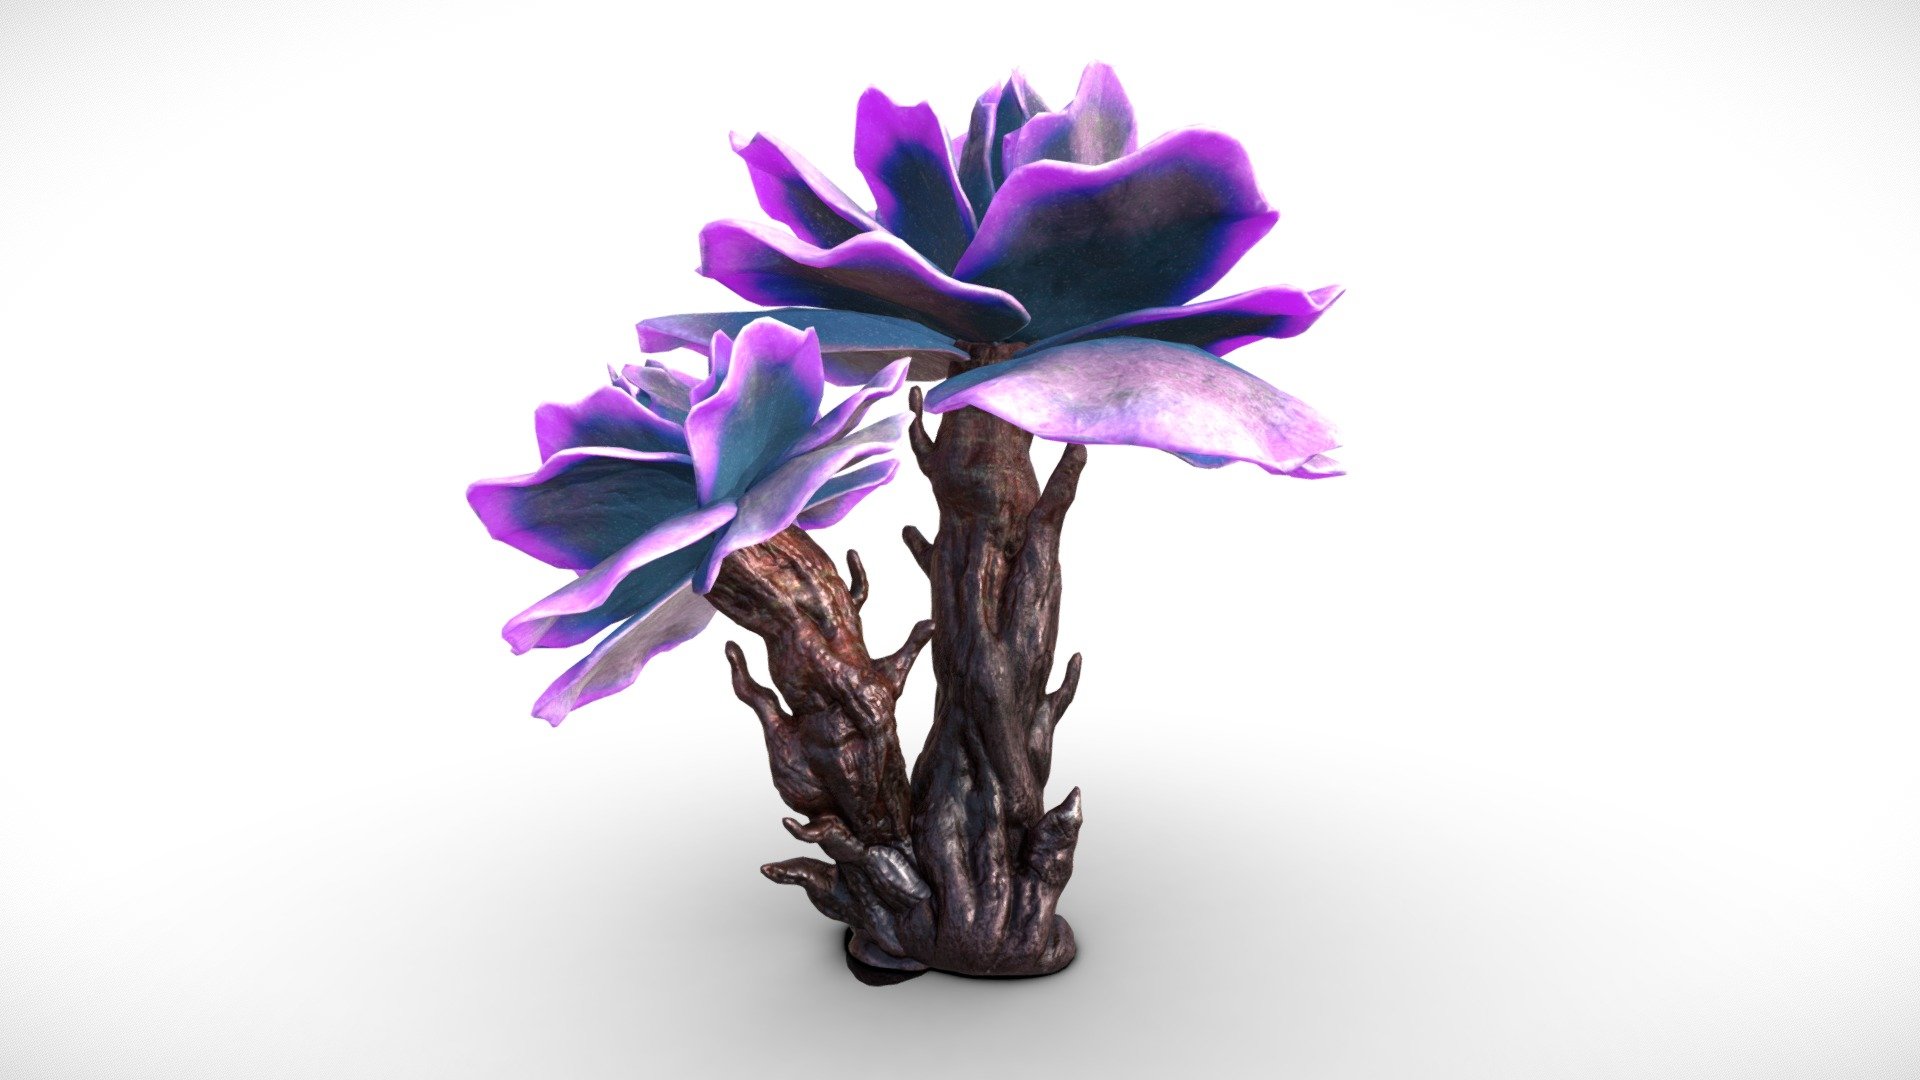 This plant comes with Two tree variations, around 7000 Vertices each.
All textures are 4096x4096 each.

Textures




Trunk A Dif (Roughness in Alpha channel)

Trunk A Norm

Trunk A Metallic + Glow (R and G Channels)

Trunk B Dif (Roughness in Alpha channel)

Trunk B Norm

Trunk B Metallic + Glow (R and G Channels)

Petals Dif (Roughness in Alpha channel)

Petals Norm

Petals Metallic + Glow (R and G Channels)
 - Alien Fantasy Plant - Flower Tree - Buy Royalty Free 3D model by Davis3D 3d model